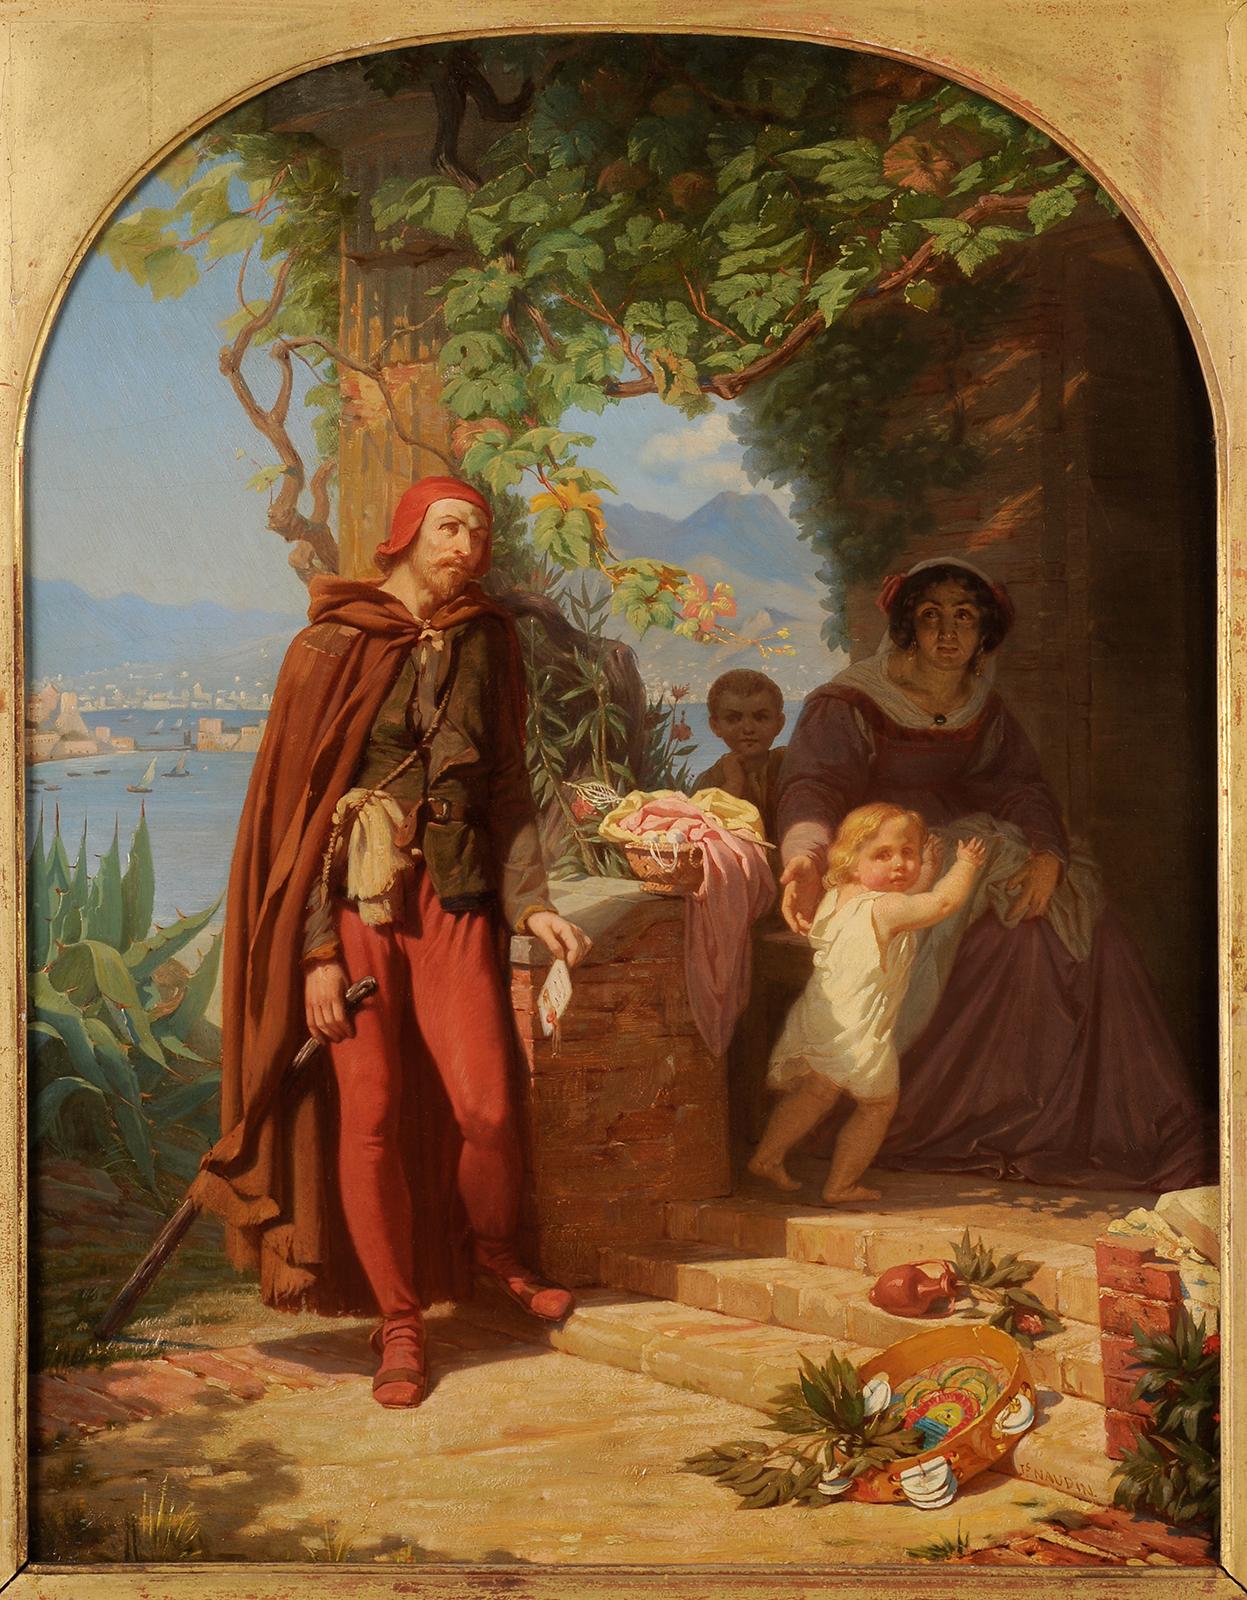 Jules Naudin (1817-c.1876) - Tasso arriving at his sister's house in Sorrento - Painting by Attilio Manganaro